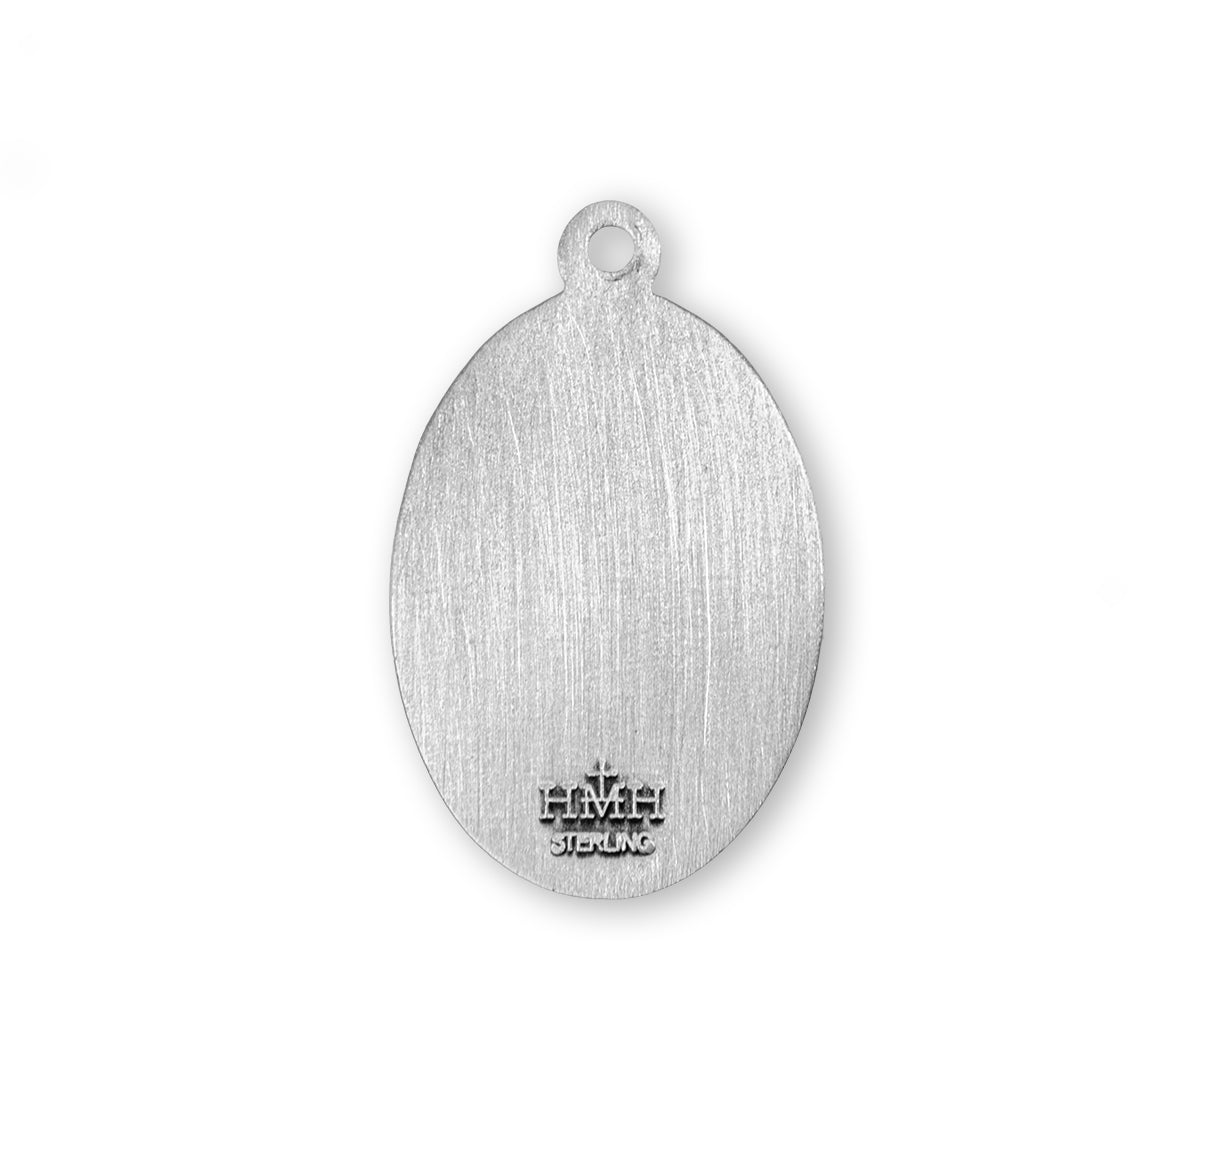 St. Zoe Sterling Silver Medal Necklace